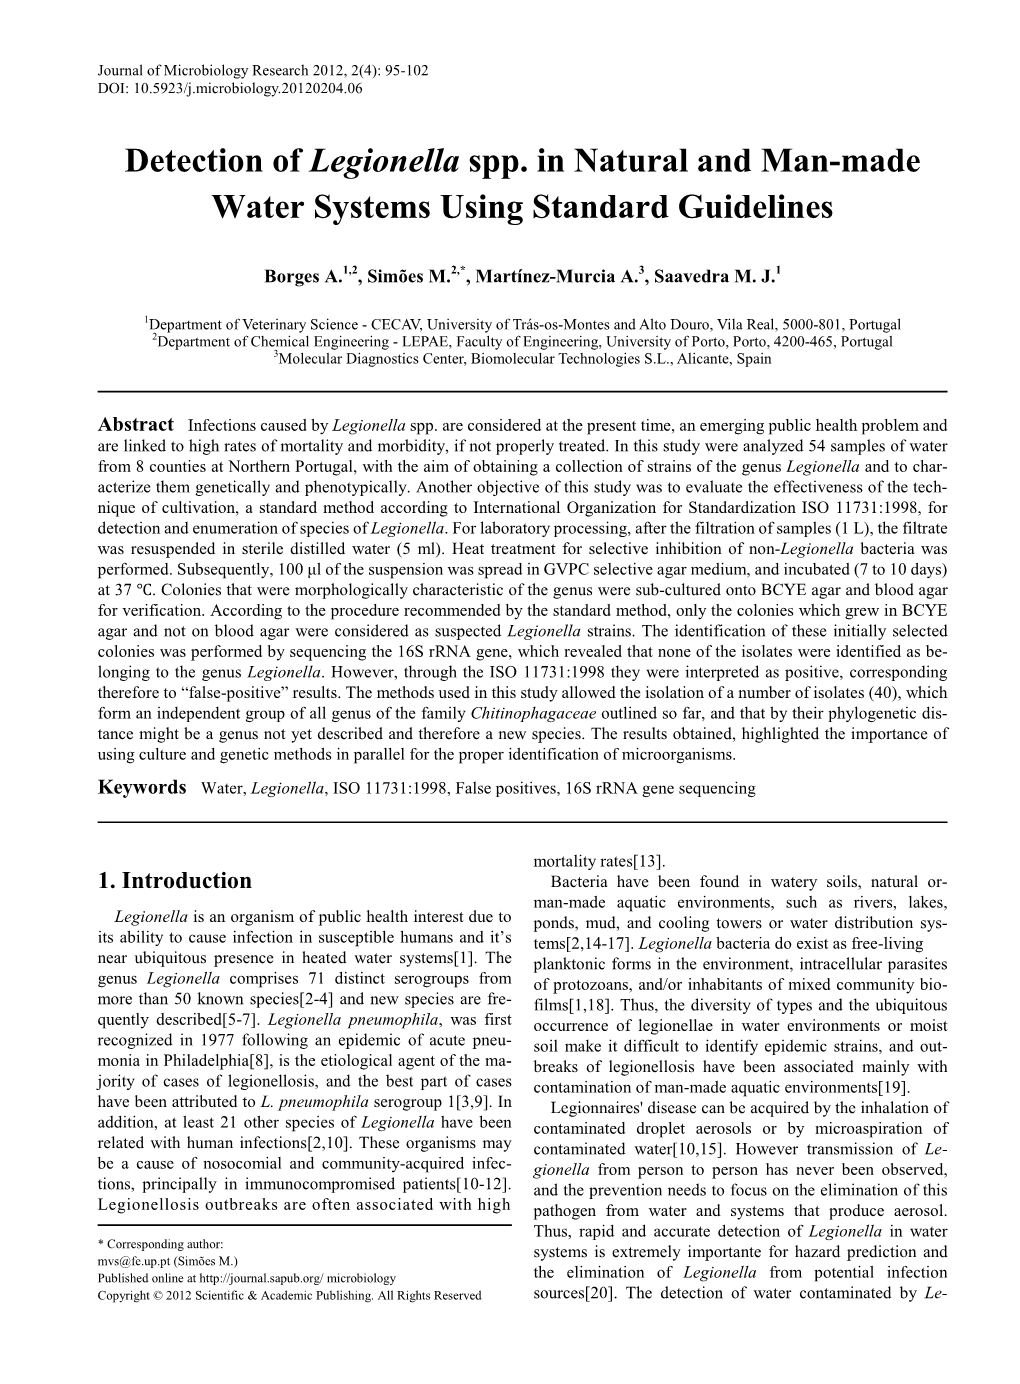 Detection of Legionella Spp. in Natural and Man-Made Water Systems Using Standard Guidelines